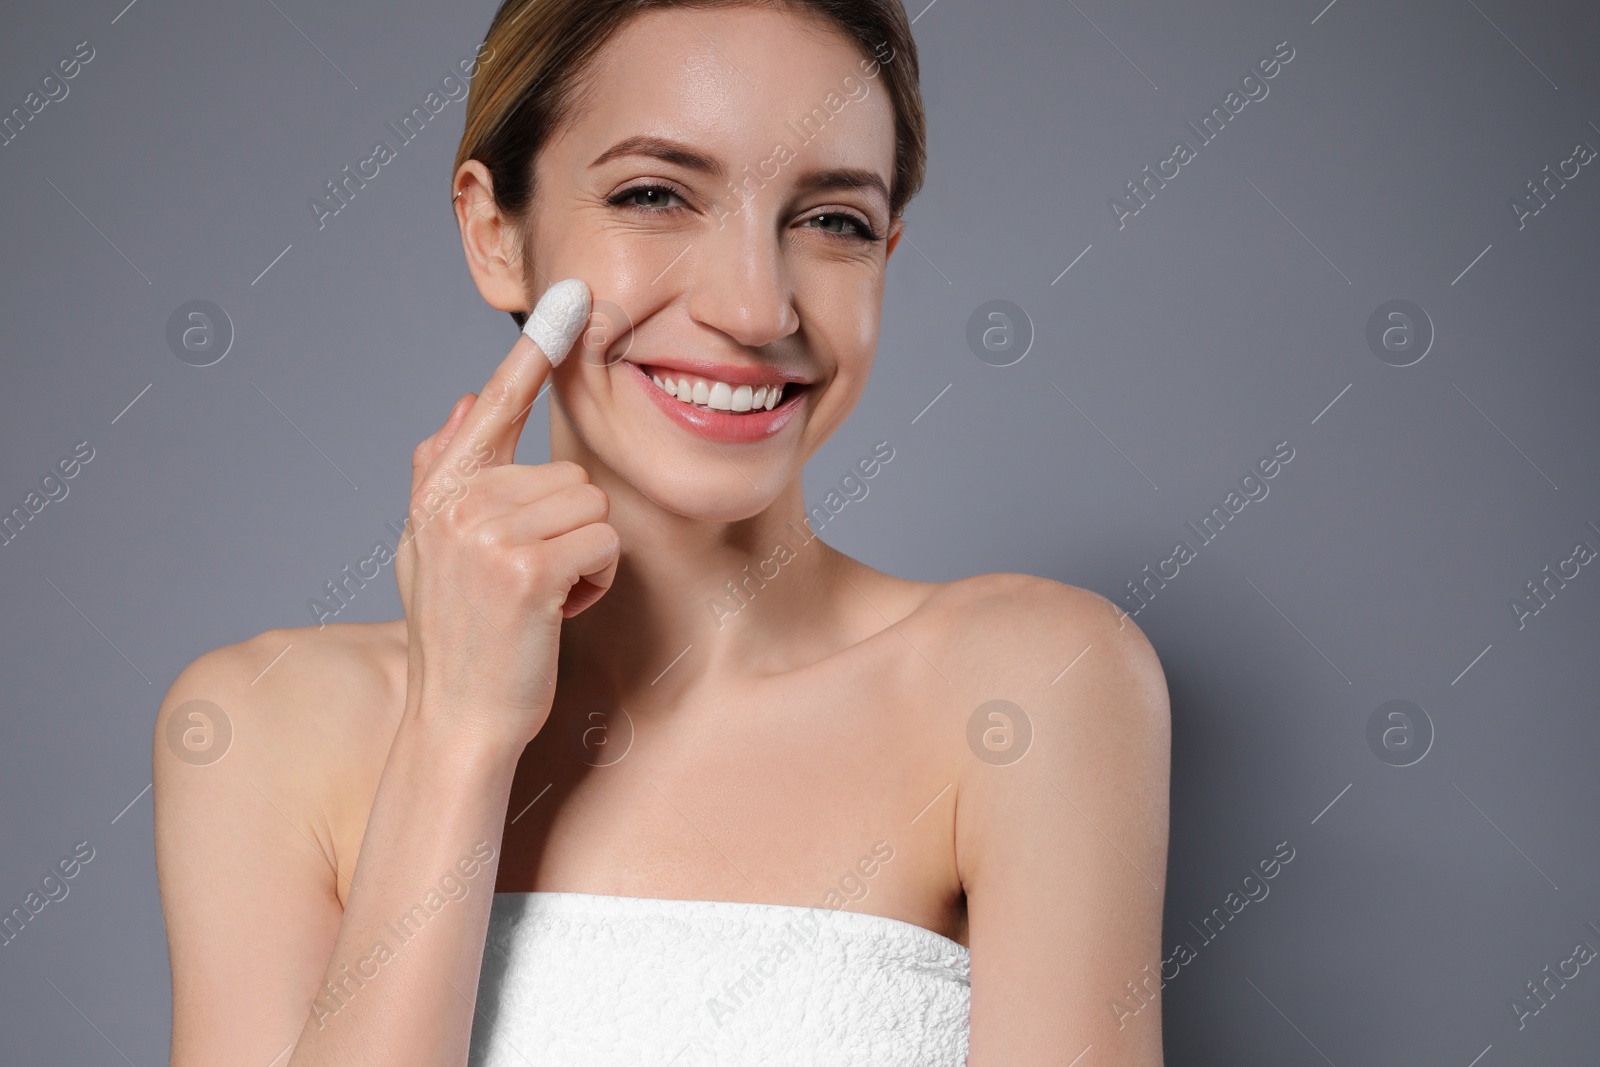 Photo of Woman using silkworm cocoon in skin care routine on grey background. Space for text